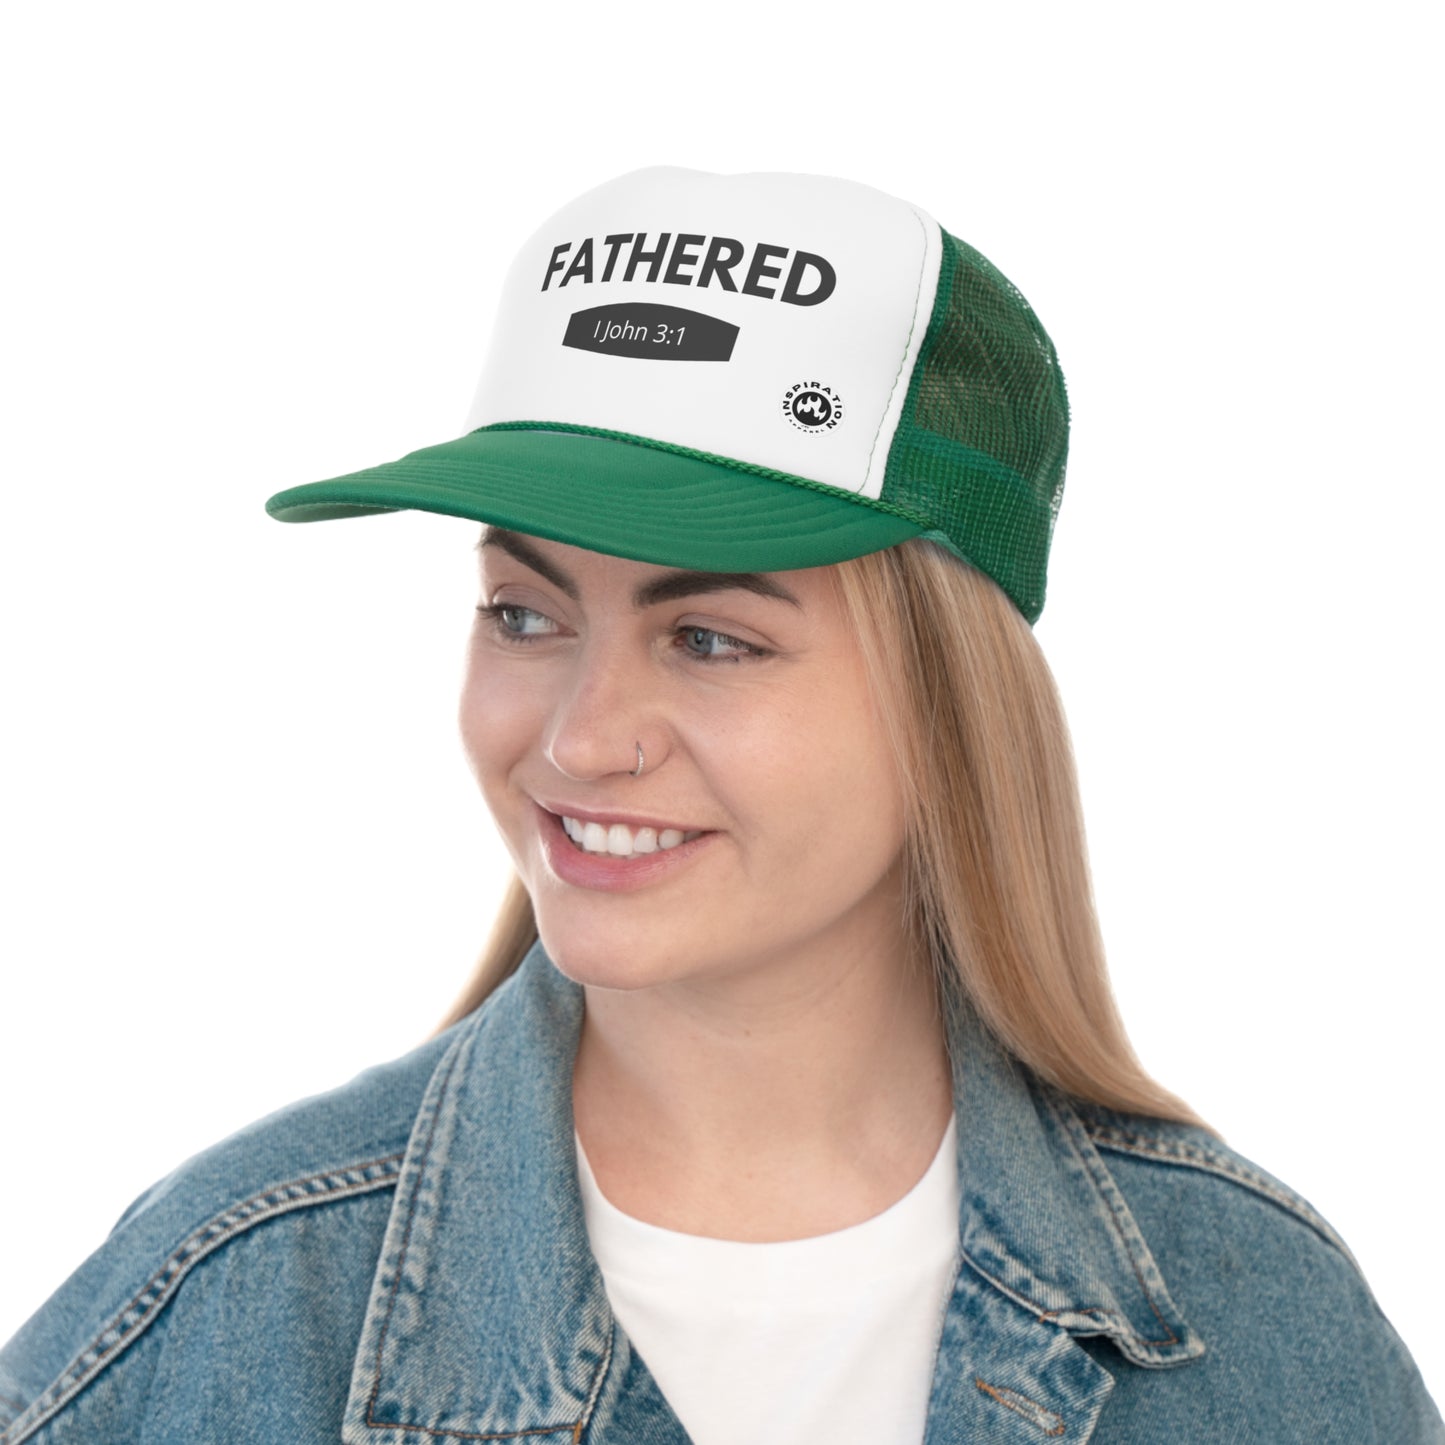 "Fathered" Trucker Caps